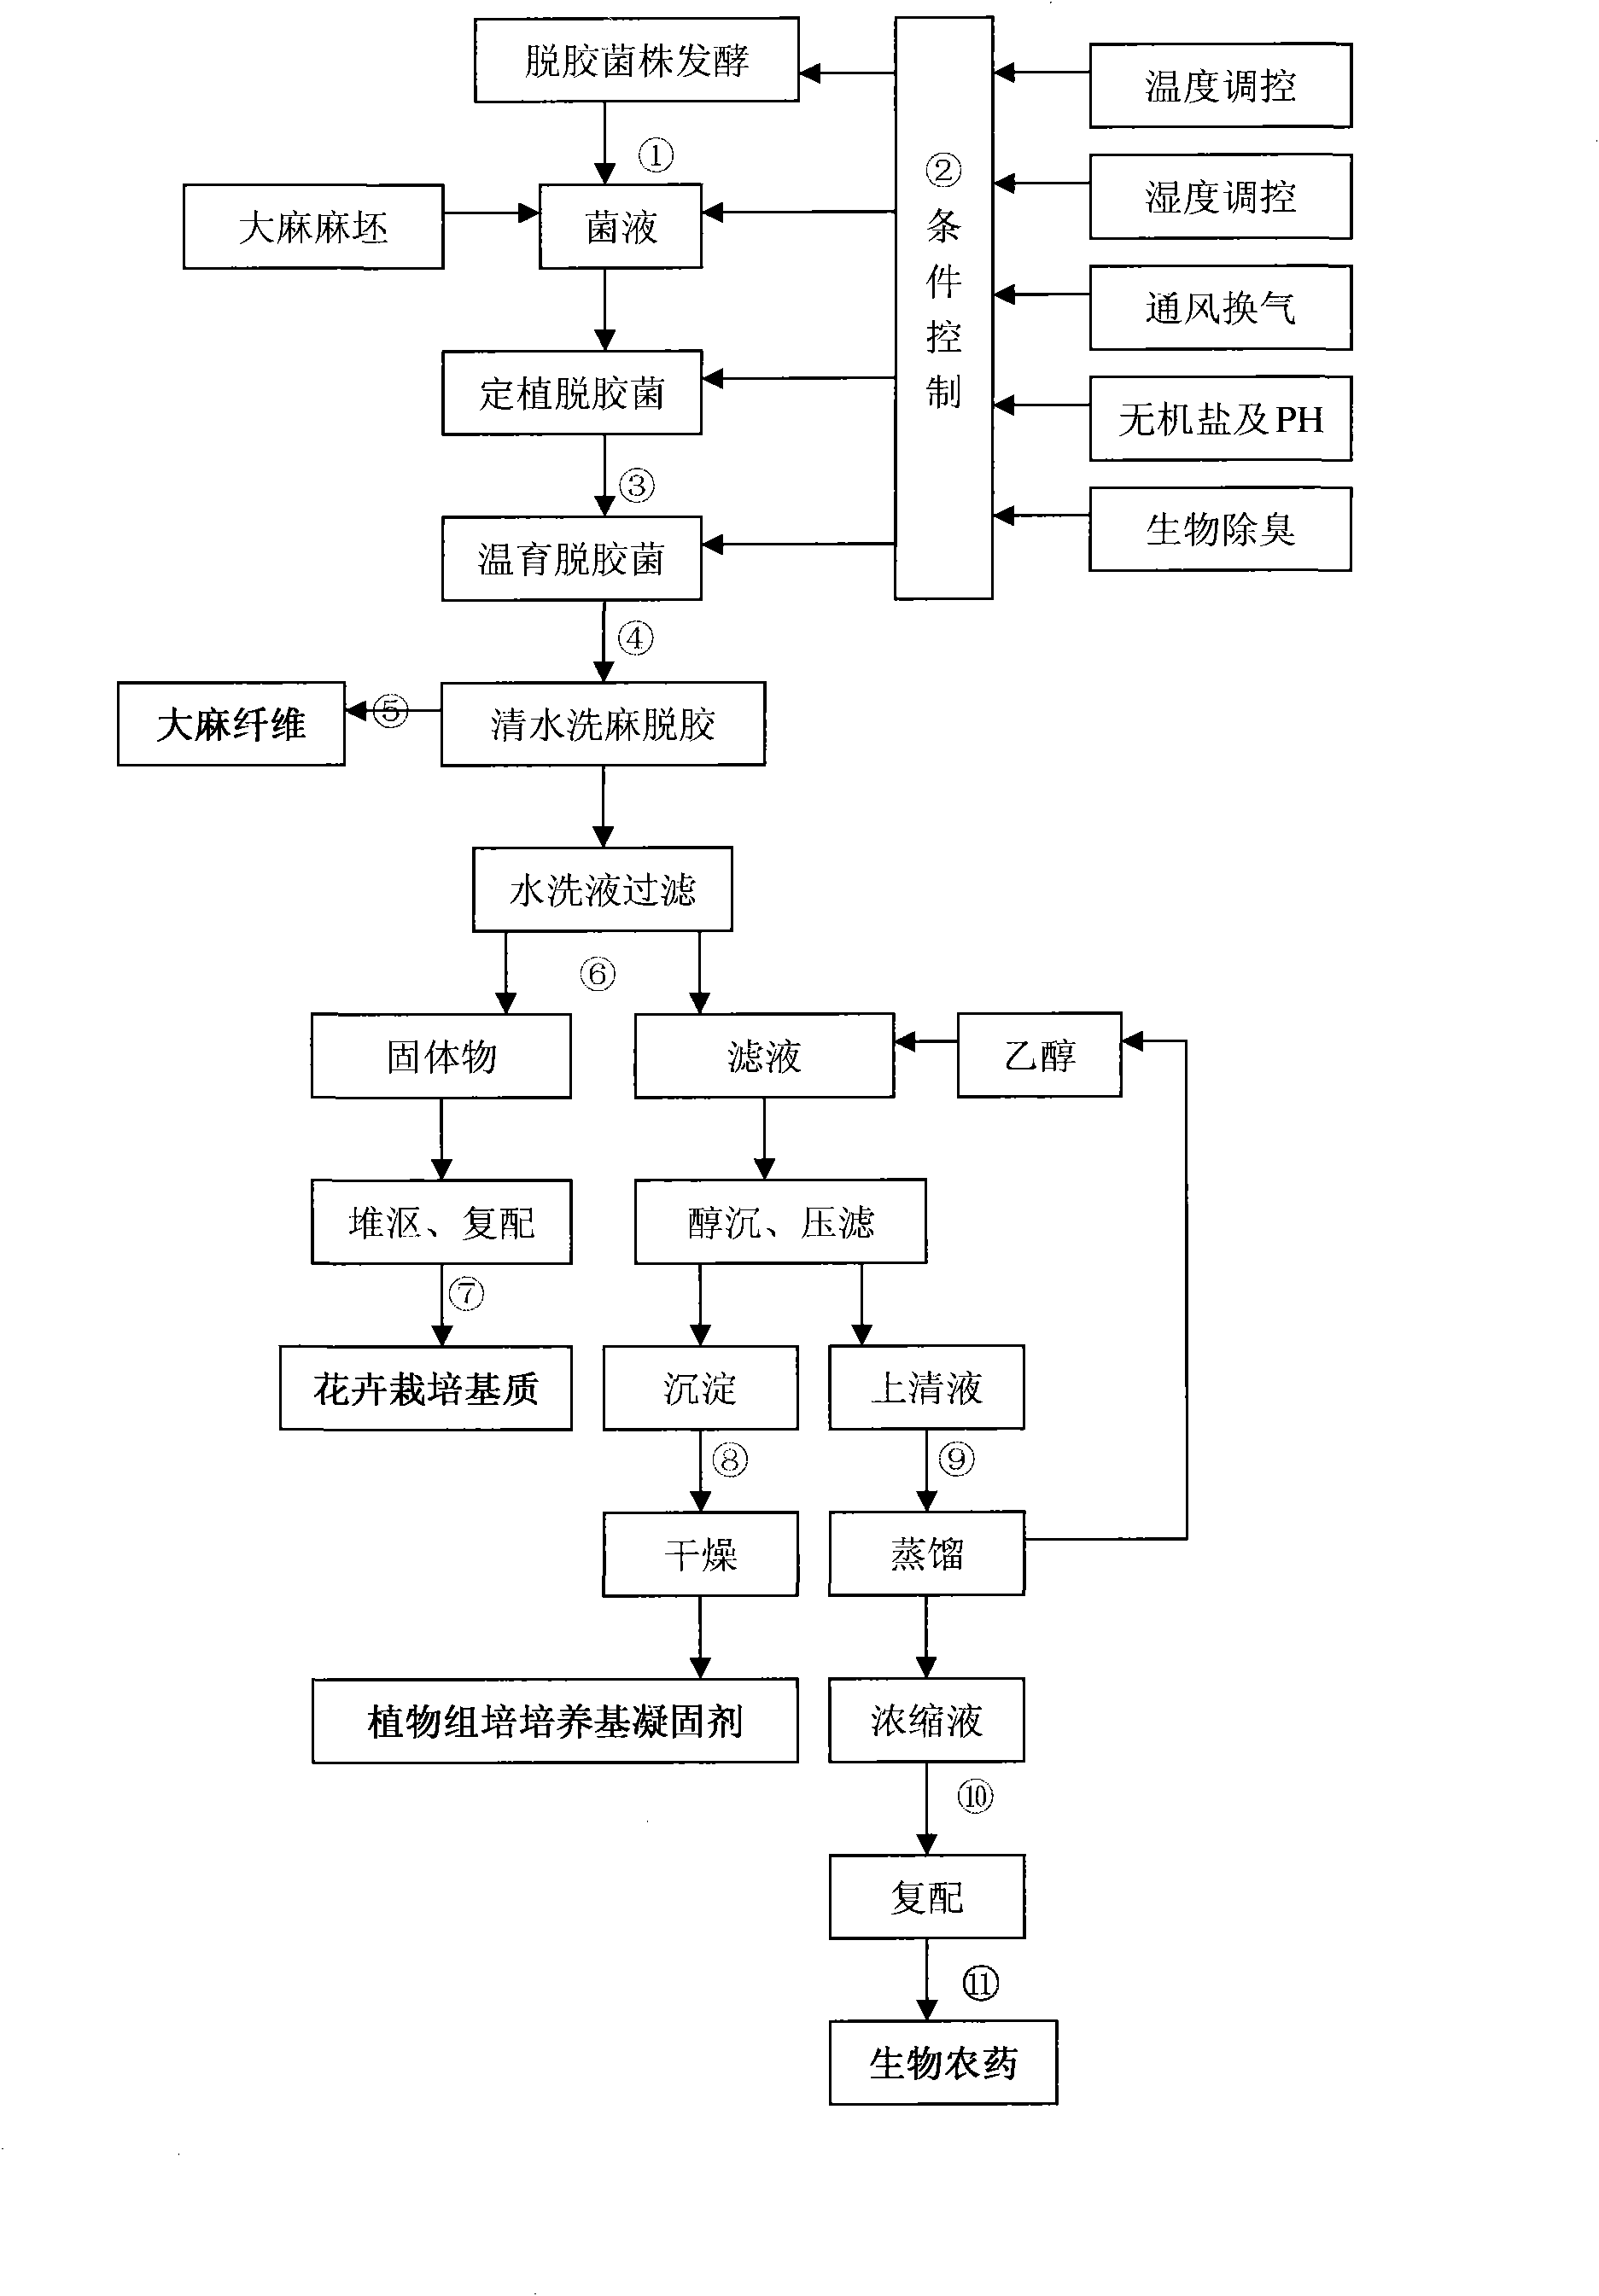 Resource utilization process for clean hemp biological degumming and waste thereof